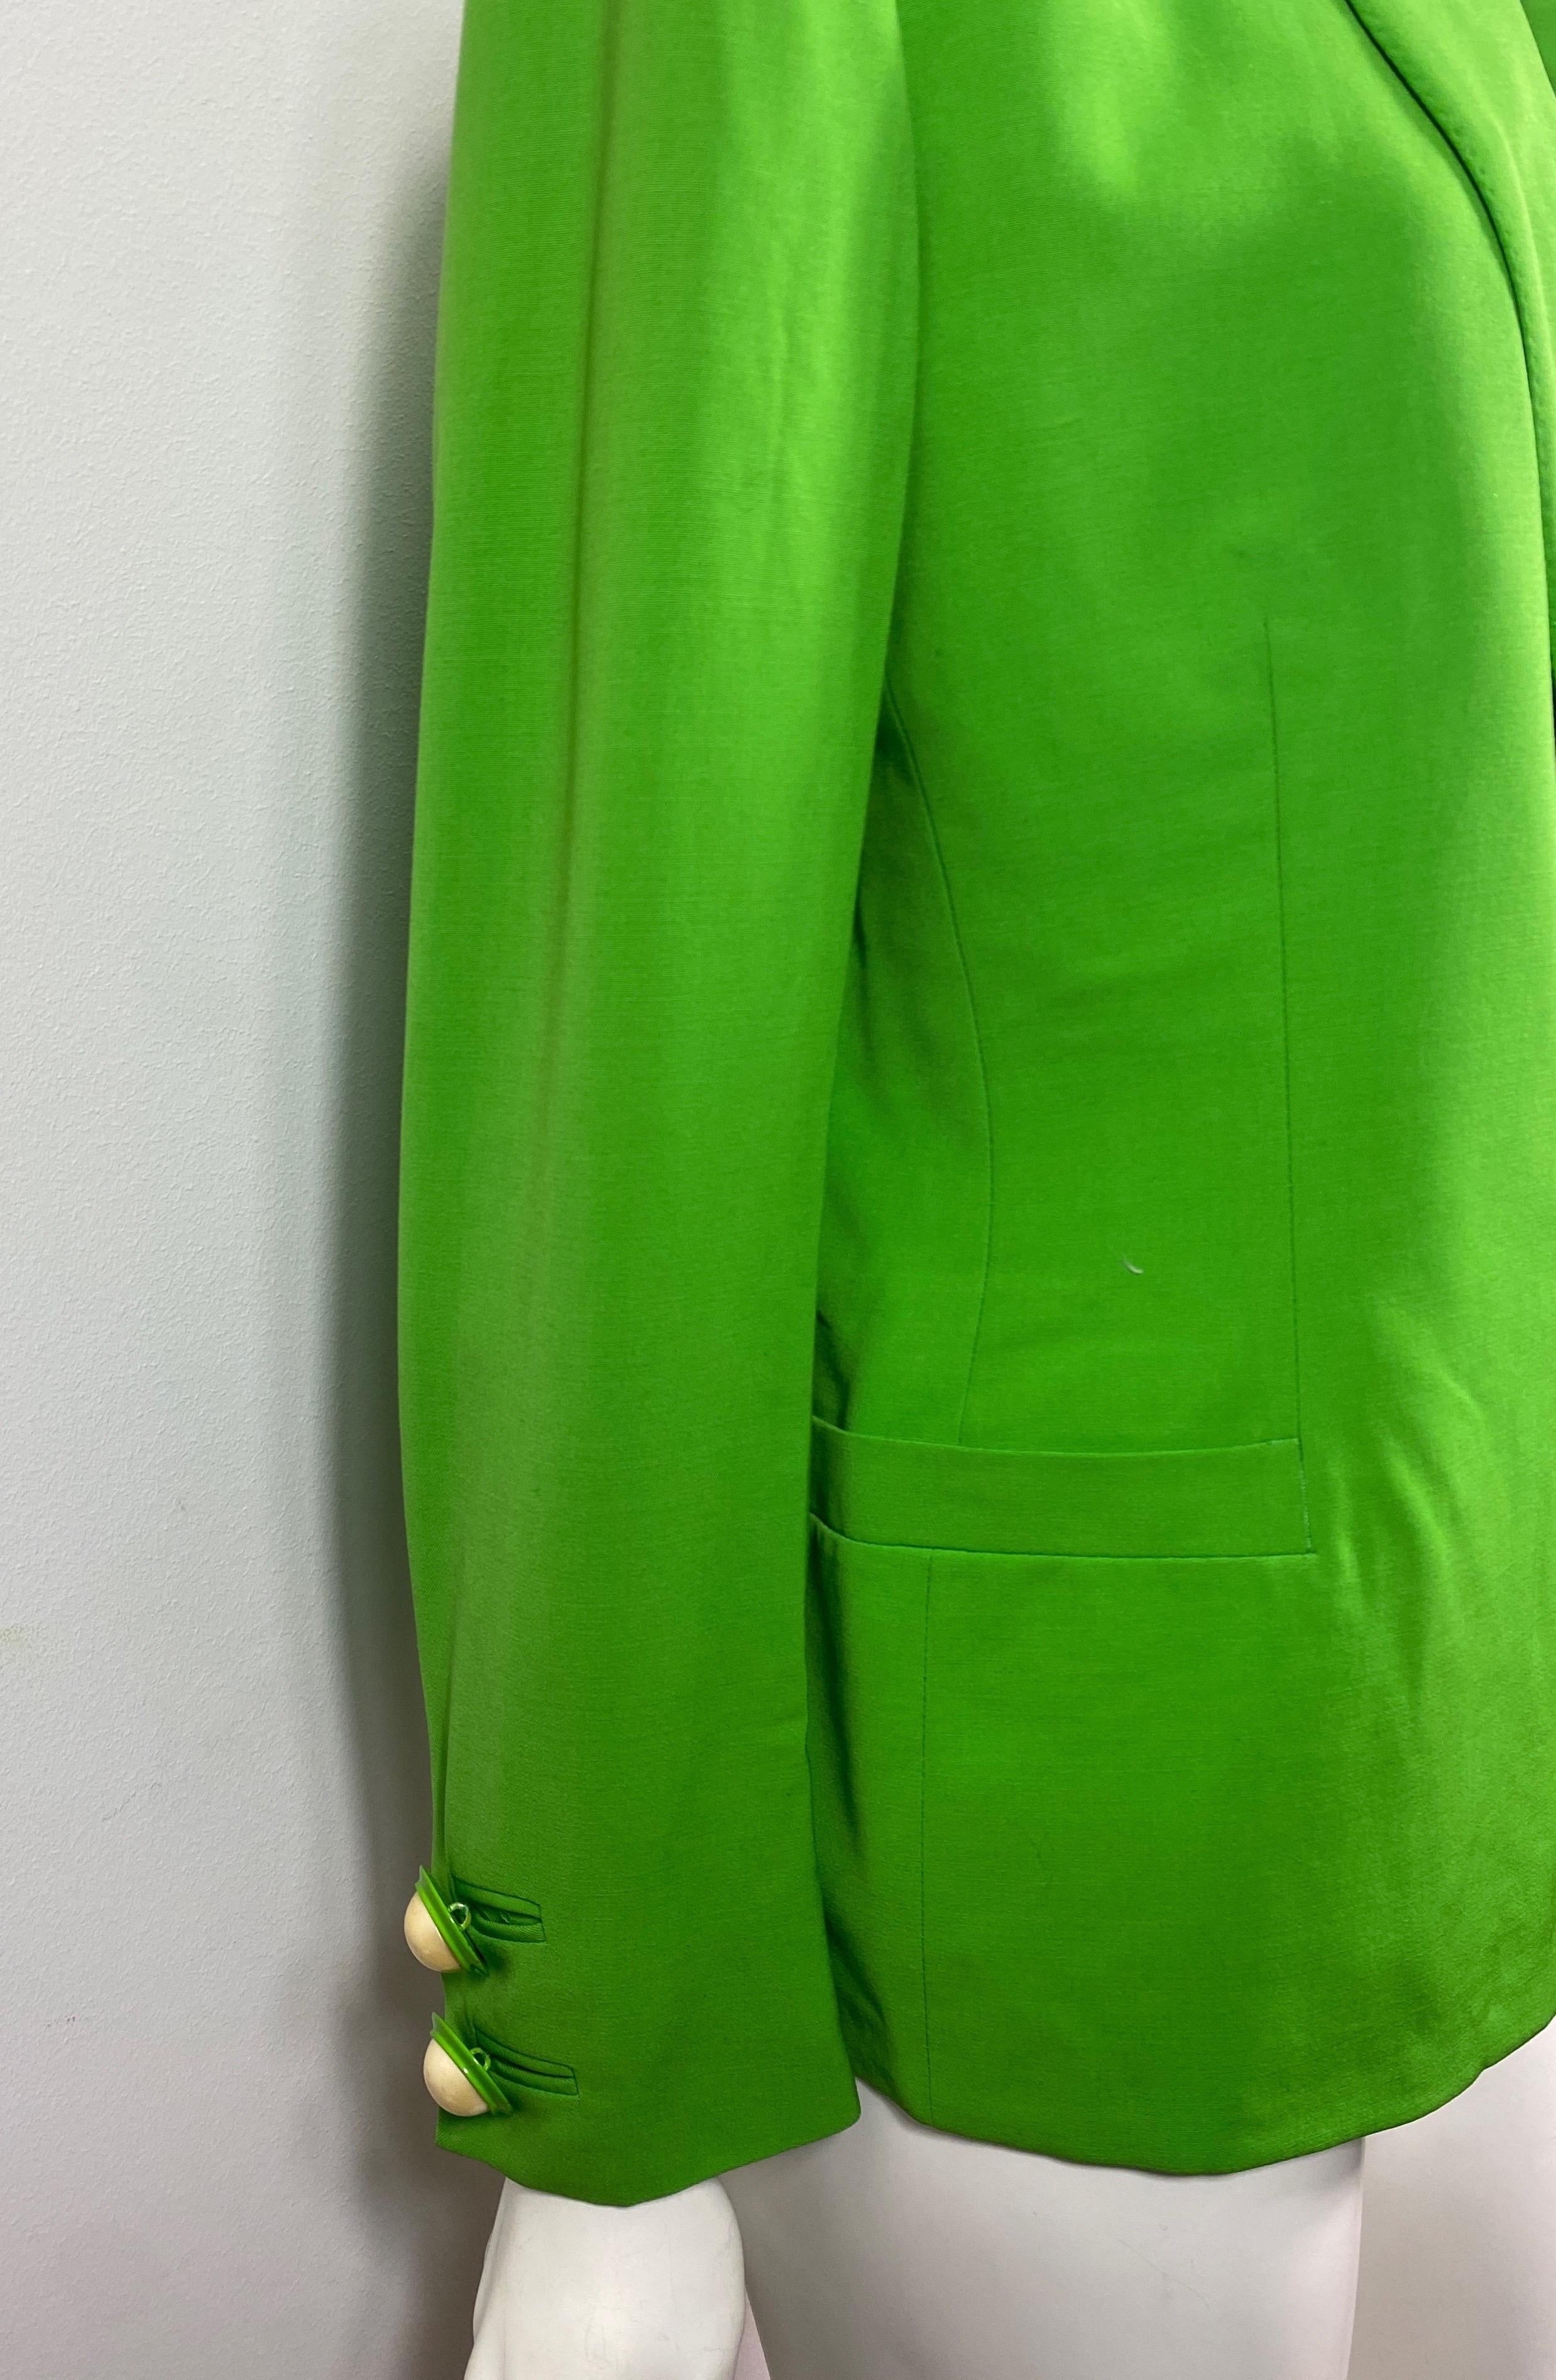 Women's Gianni Versace Couture 1990’s Neón Green Double Breasted Jacket-Size 42 For Sale